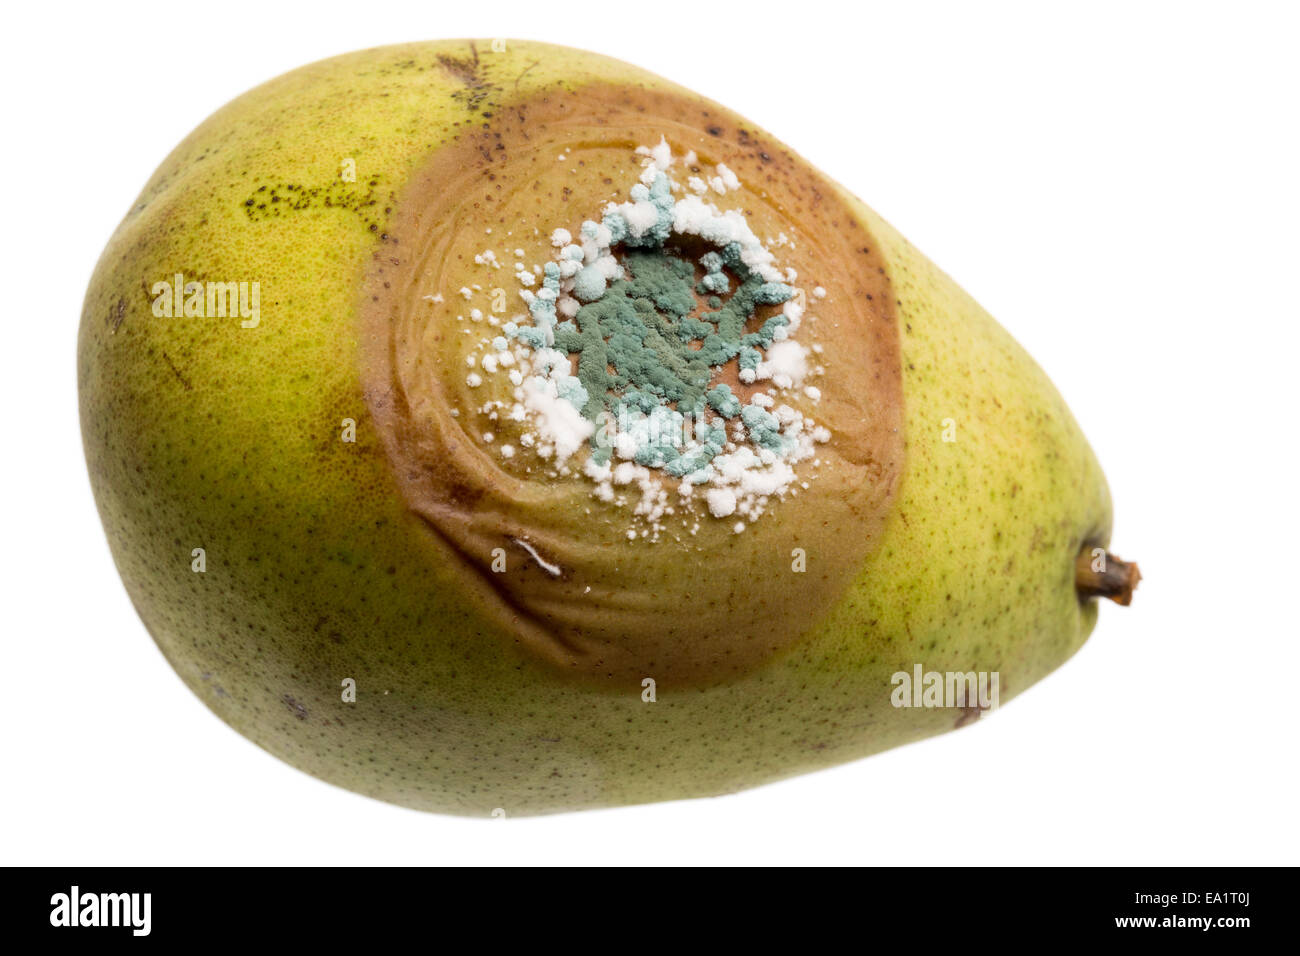 Close up of fungus growing on pear Stock Photo